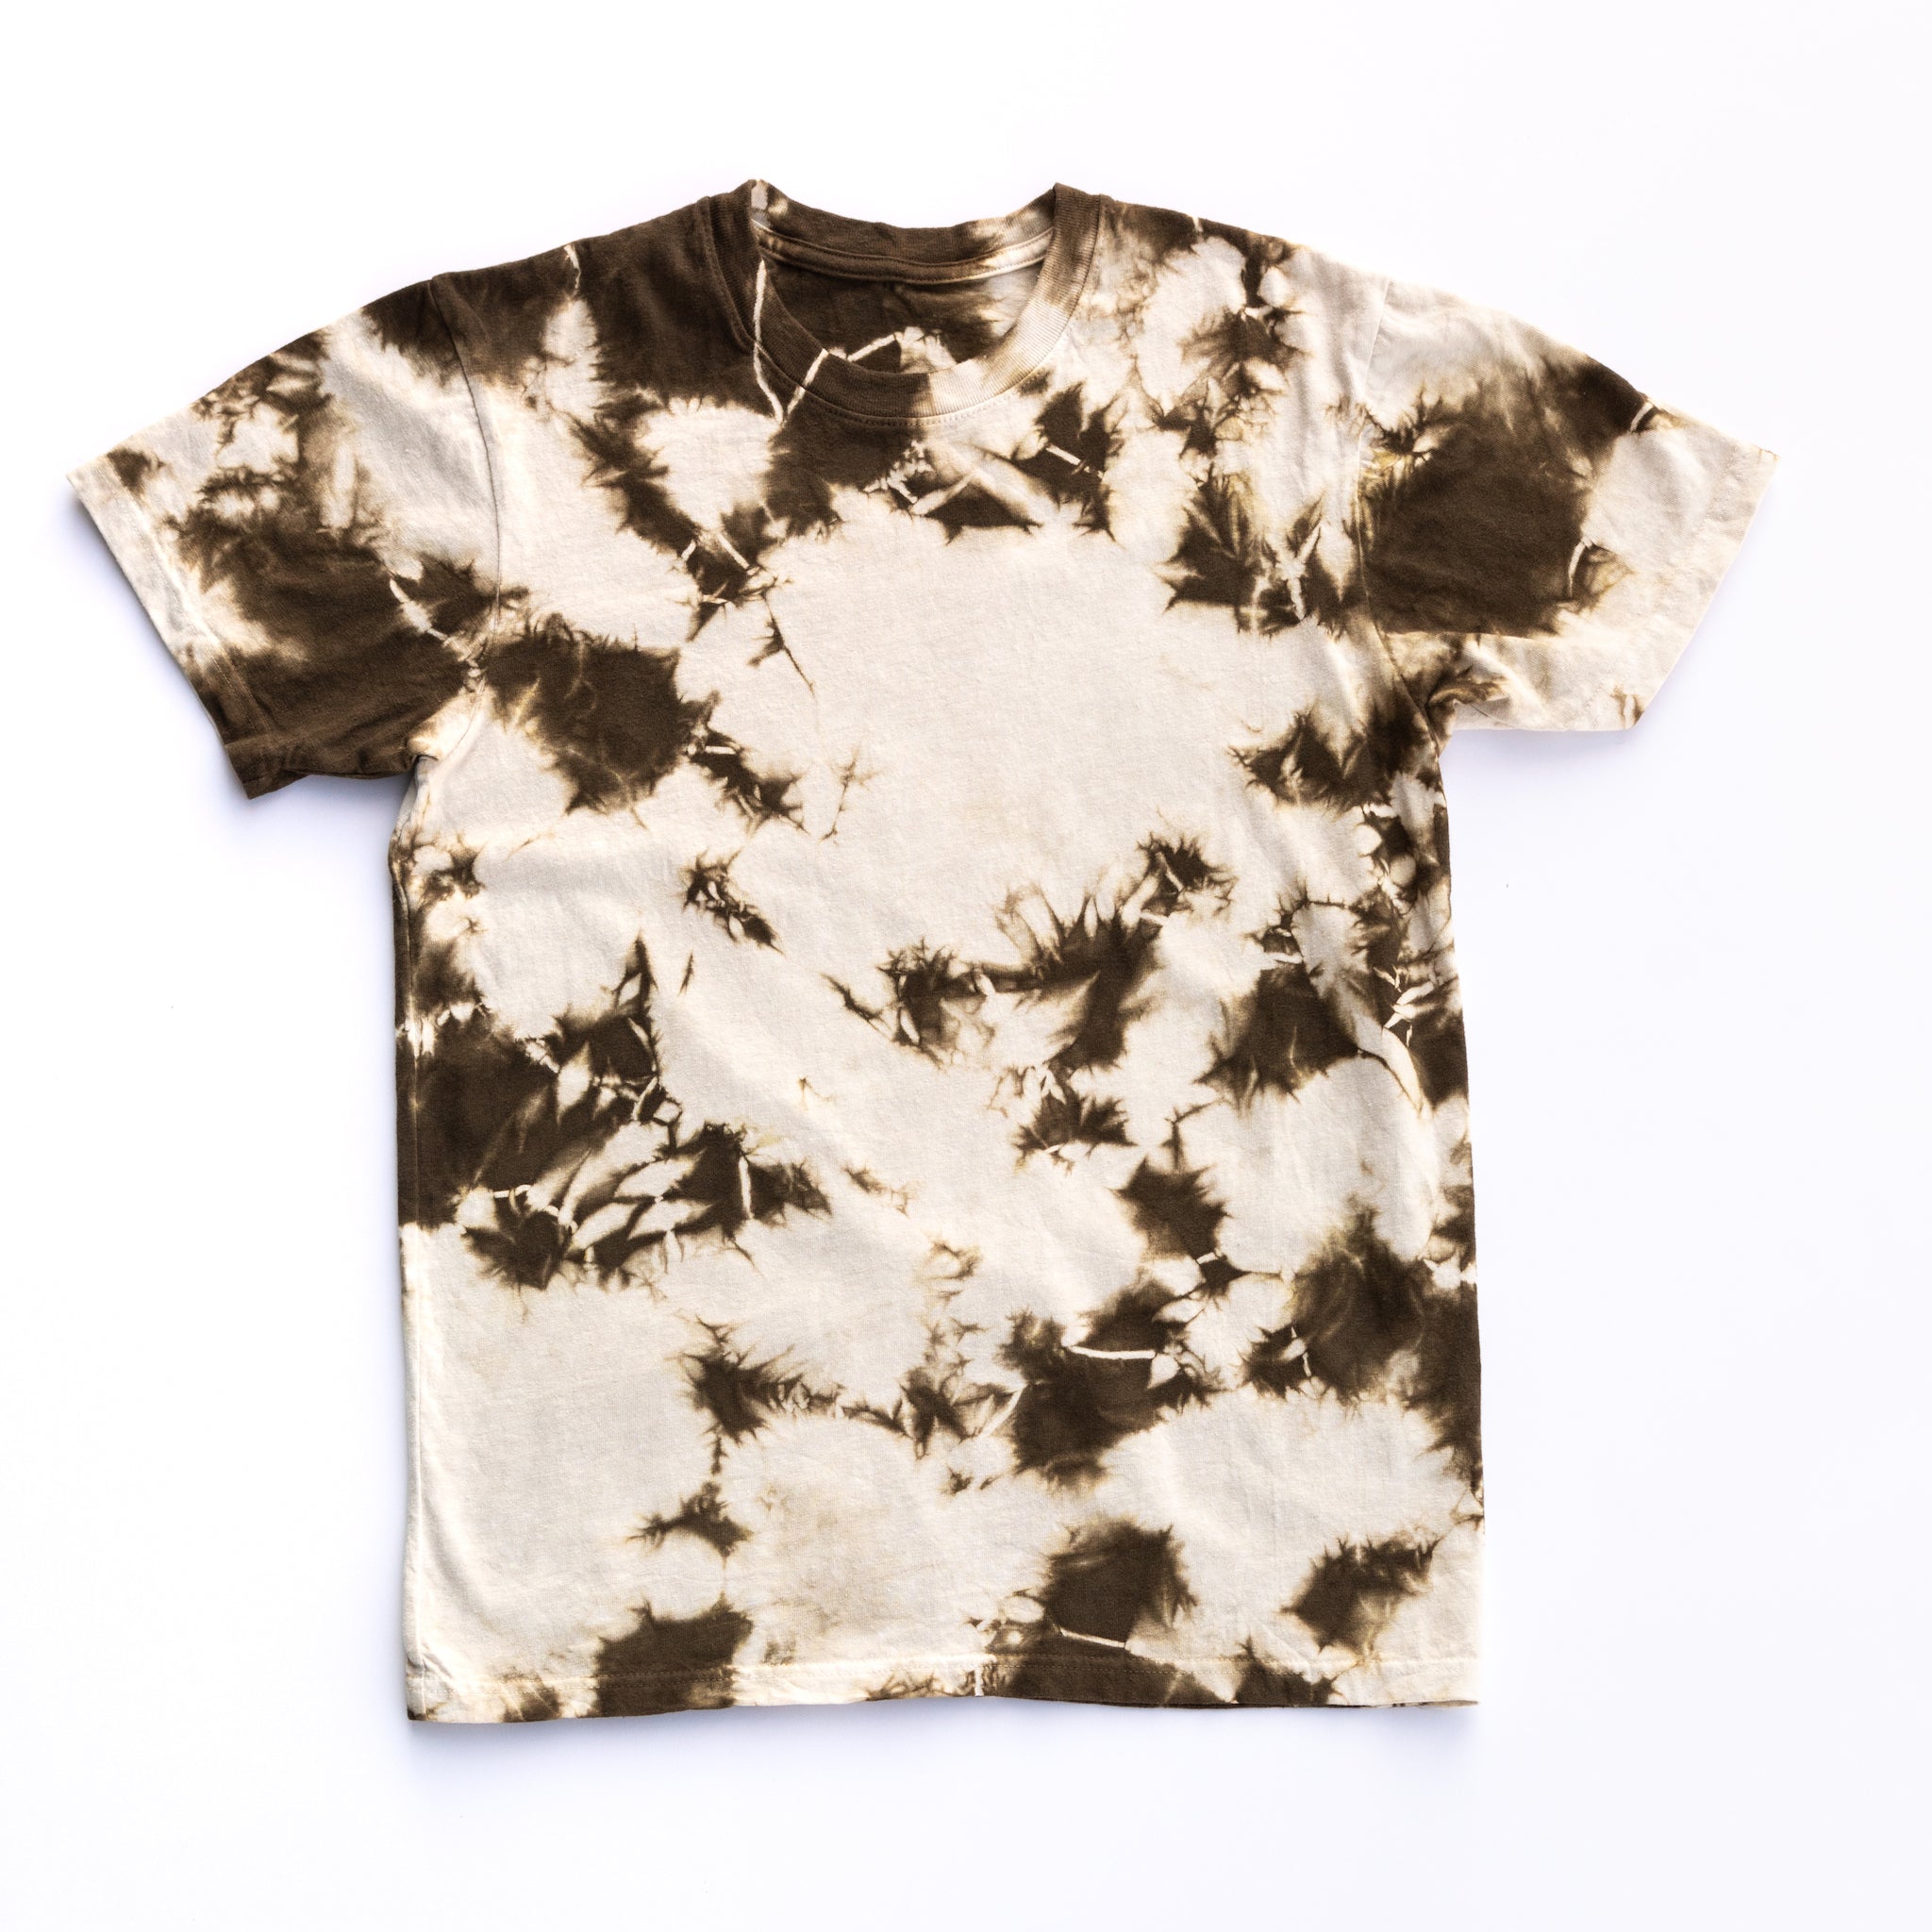 A Solid State Clothing Natural Tie Dye t-shirt lies against a plain background. Because each shirt is hand dyed in the USA, the pattern varies in all photos of shirts. The shirt pictured here has more white than green in its pattern